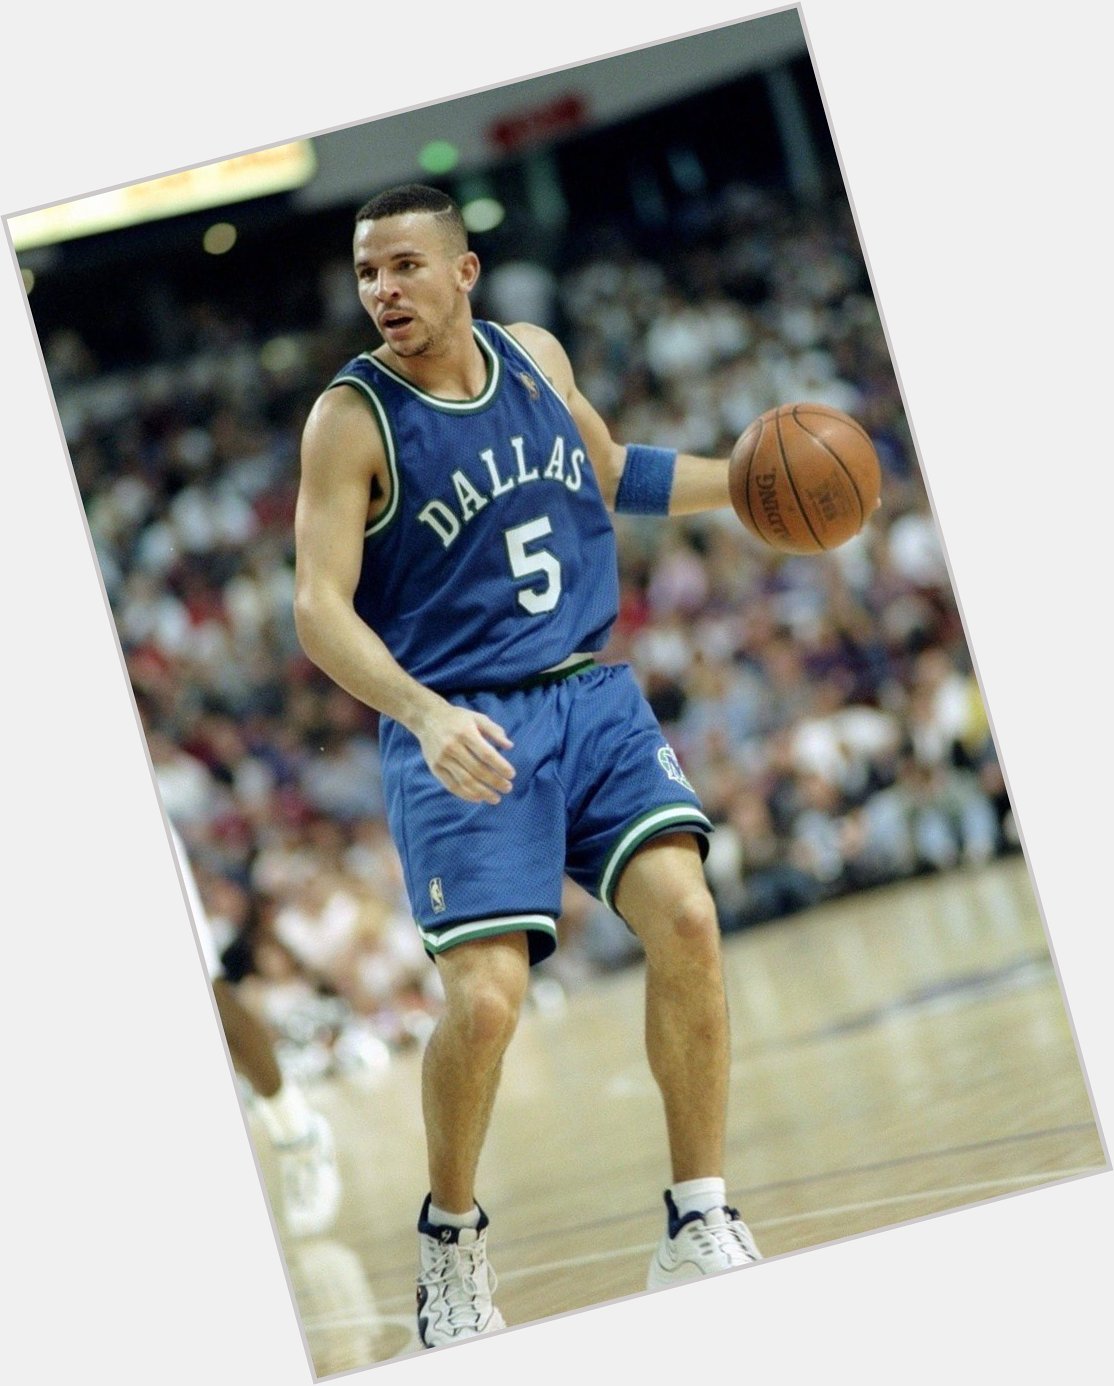 Happy belated birthday to my favorite PG of all-time, Jason Kidd. 